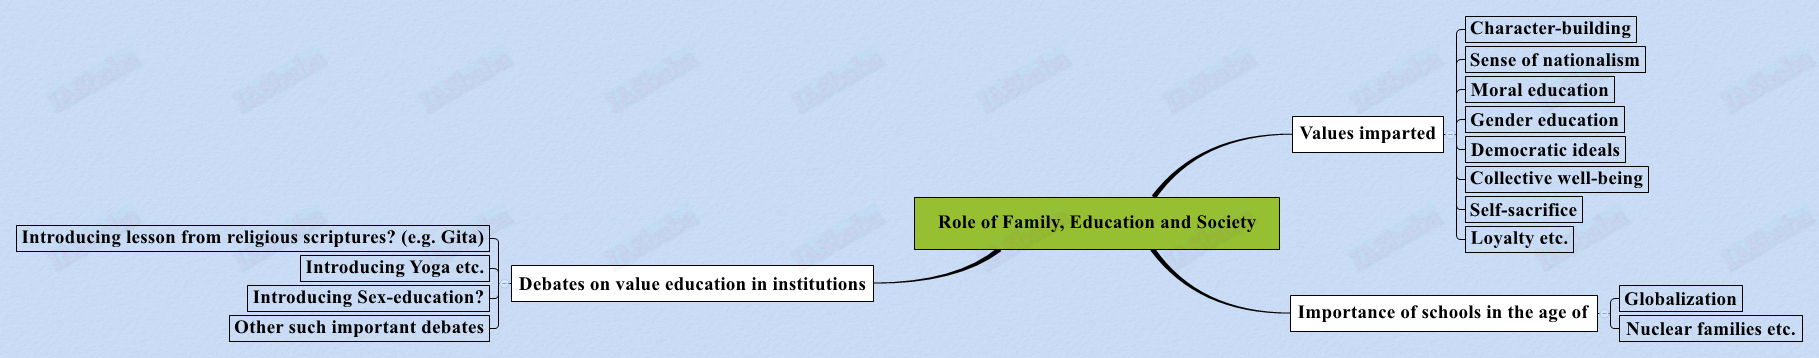 Role-of-Family-Education-and-Society